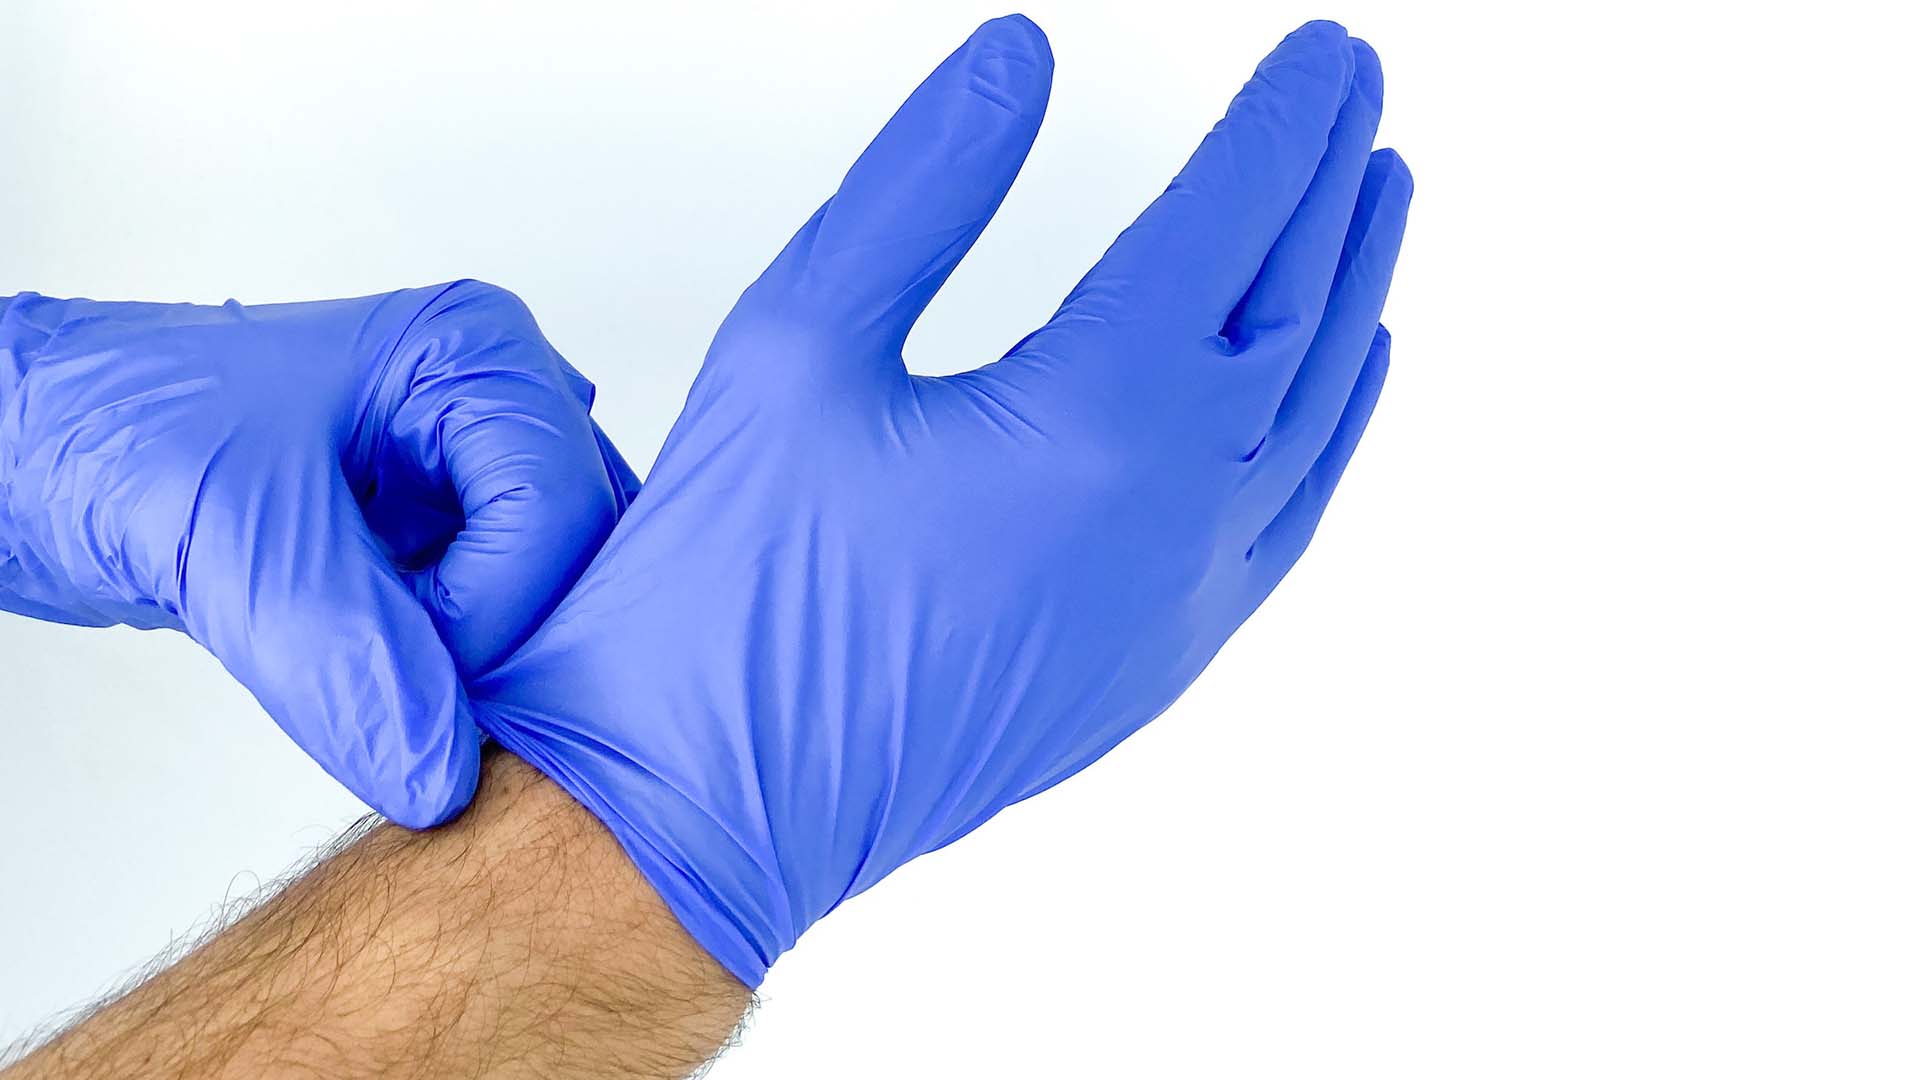 9 Reasons Why Nitrile Gloves Are Better Than Latex and Vinyl —